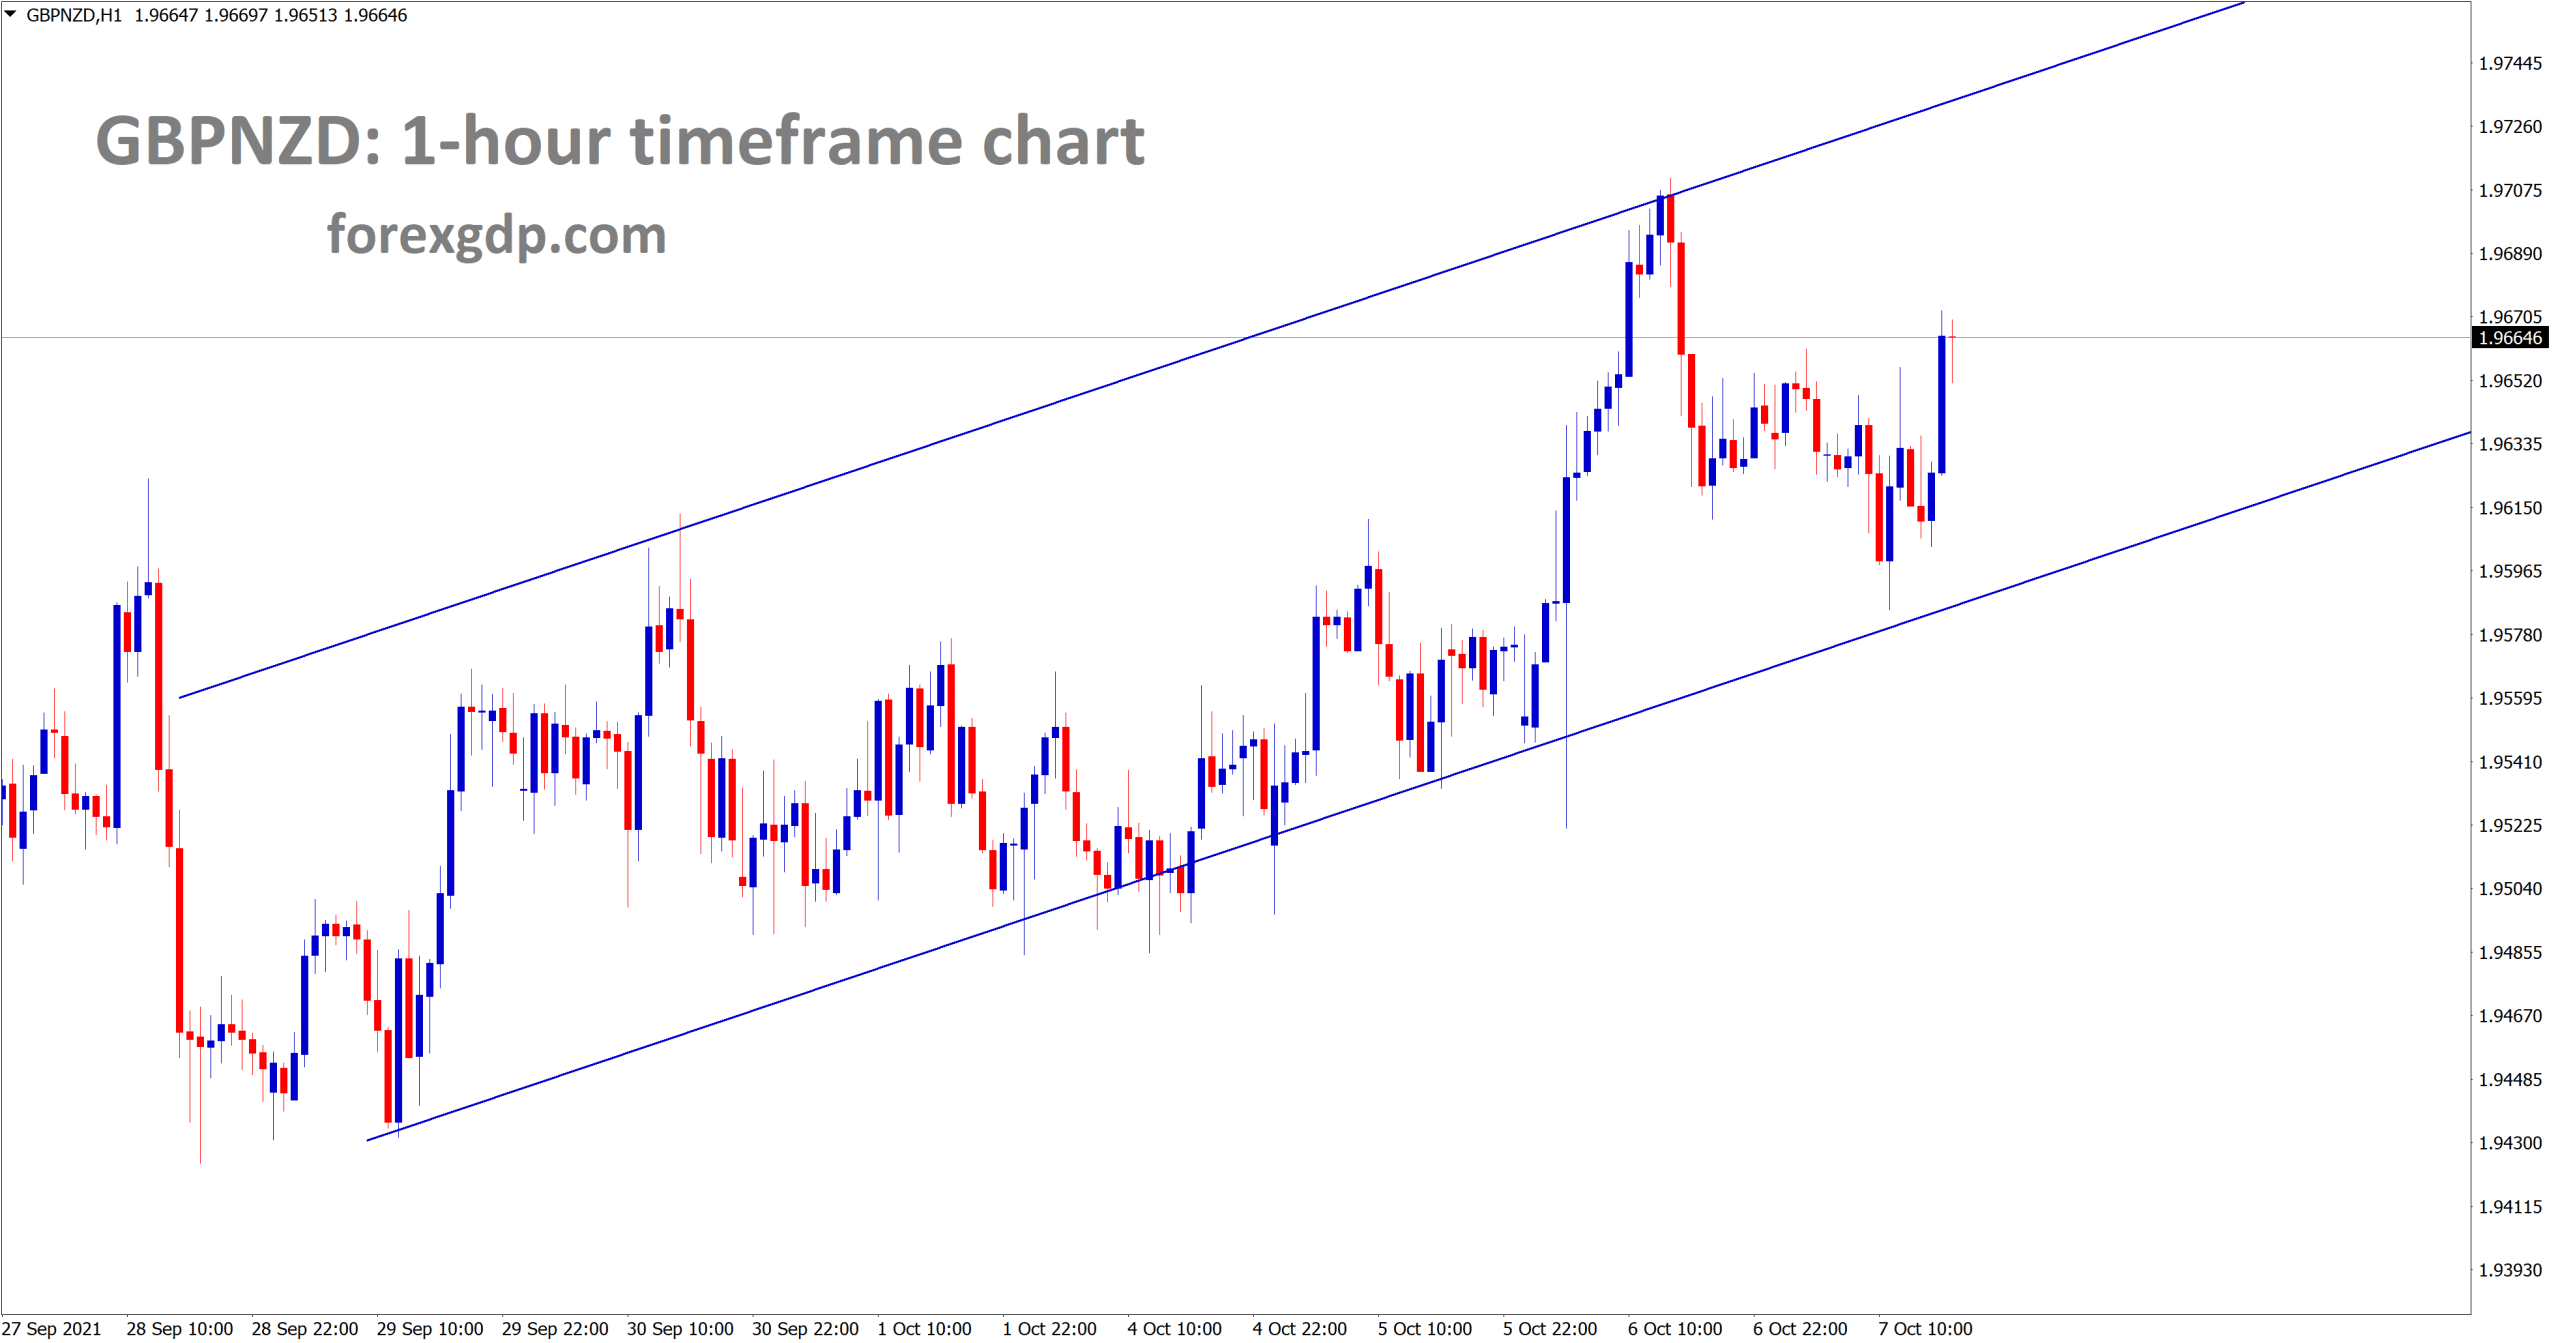 GBPNZD is moving in an Ascending channel